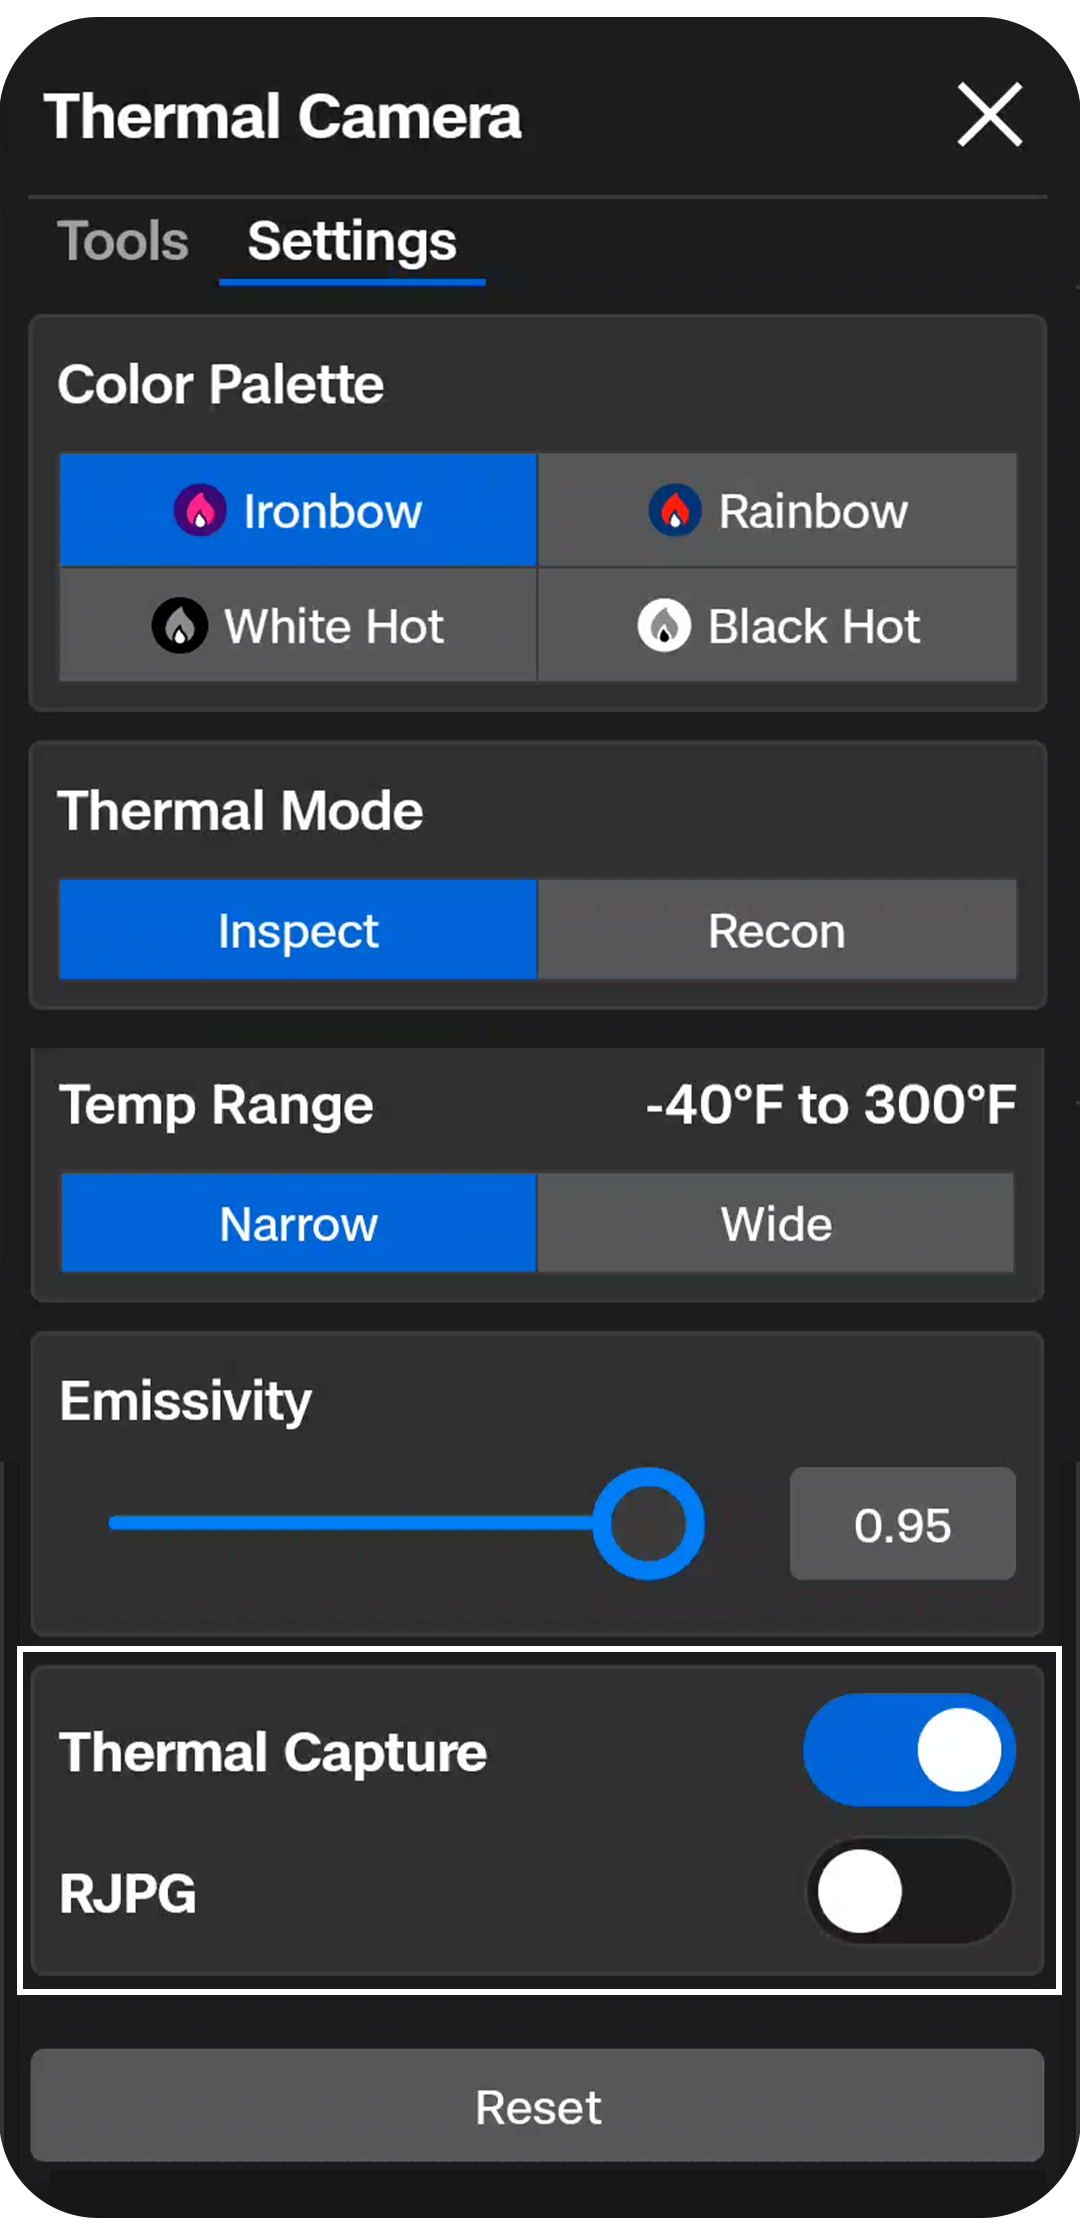 CS_App3_media_UI_thermal_settings_cropped_full_options_rounded_anno.png